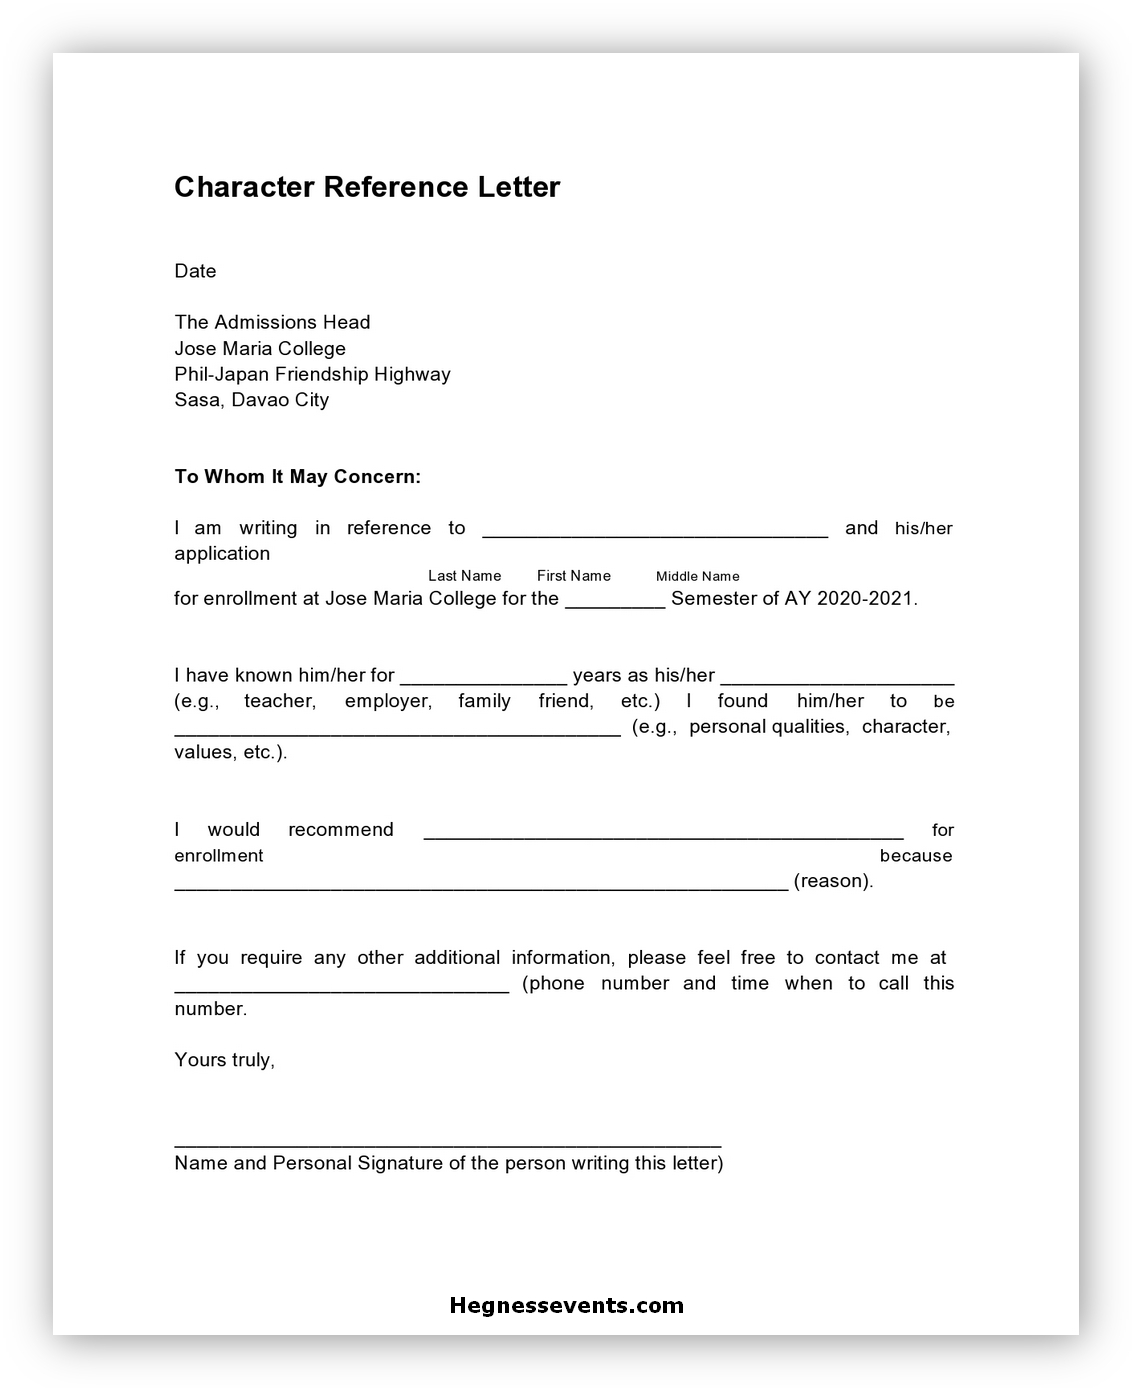 Letter of Reference Character 09